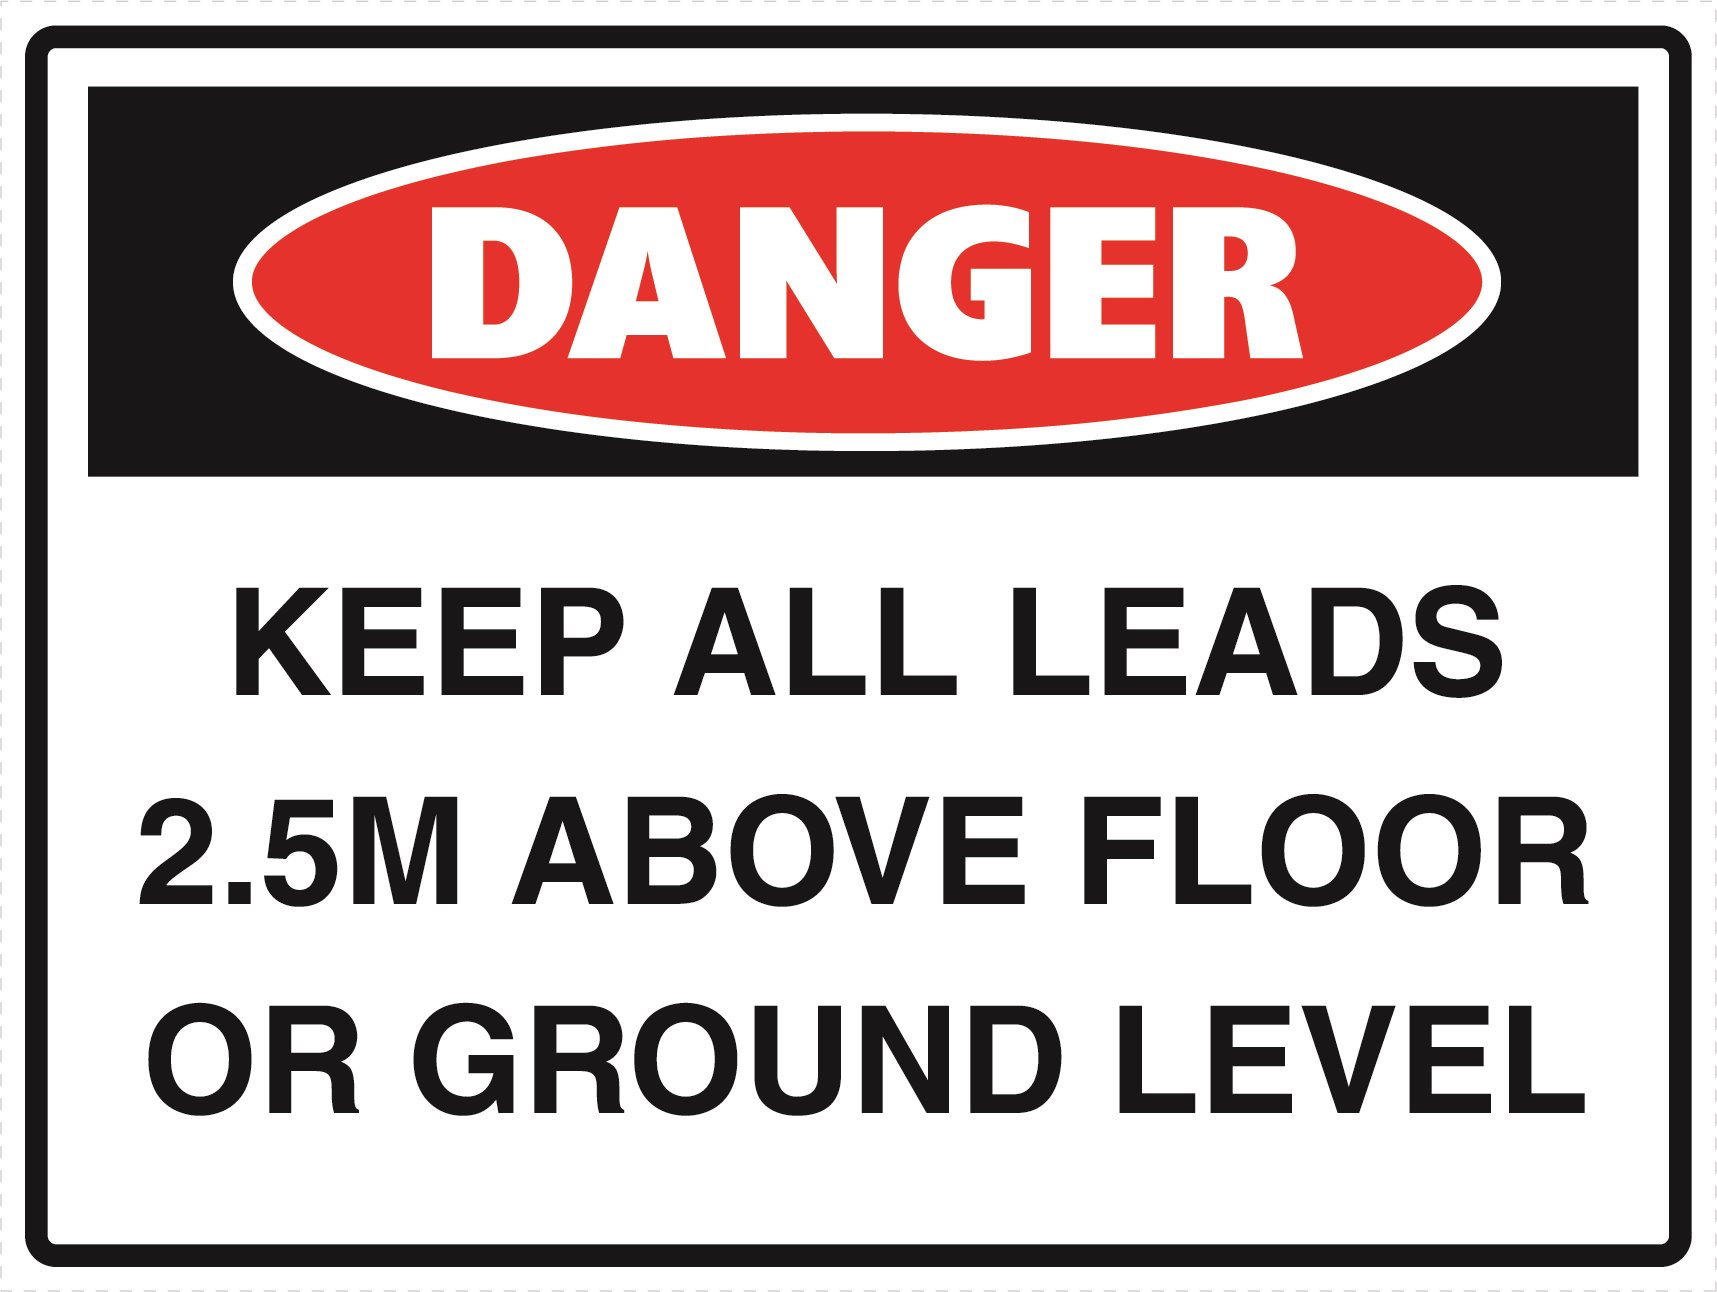 Danger - Keep All Leads 25m above Floor or Ground Level